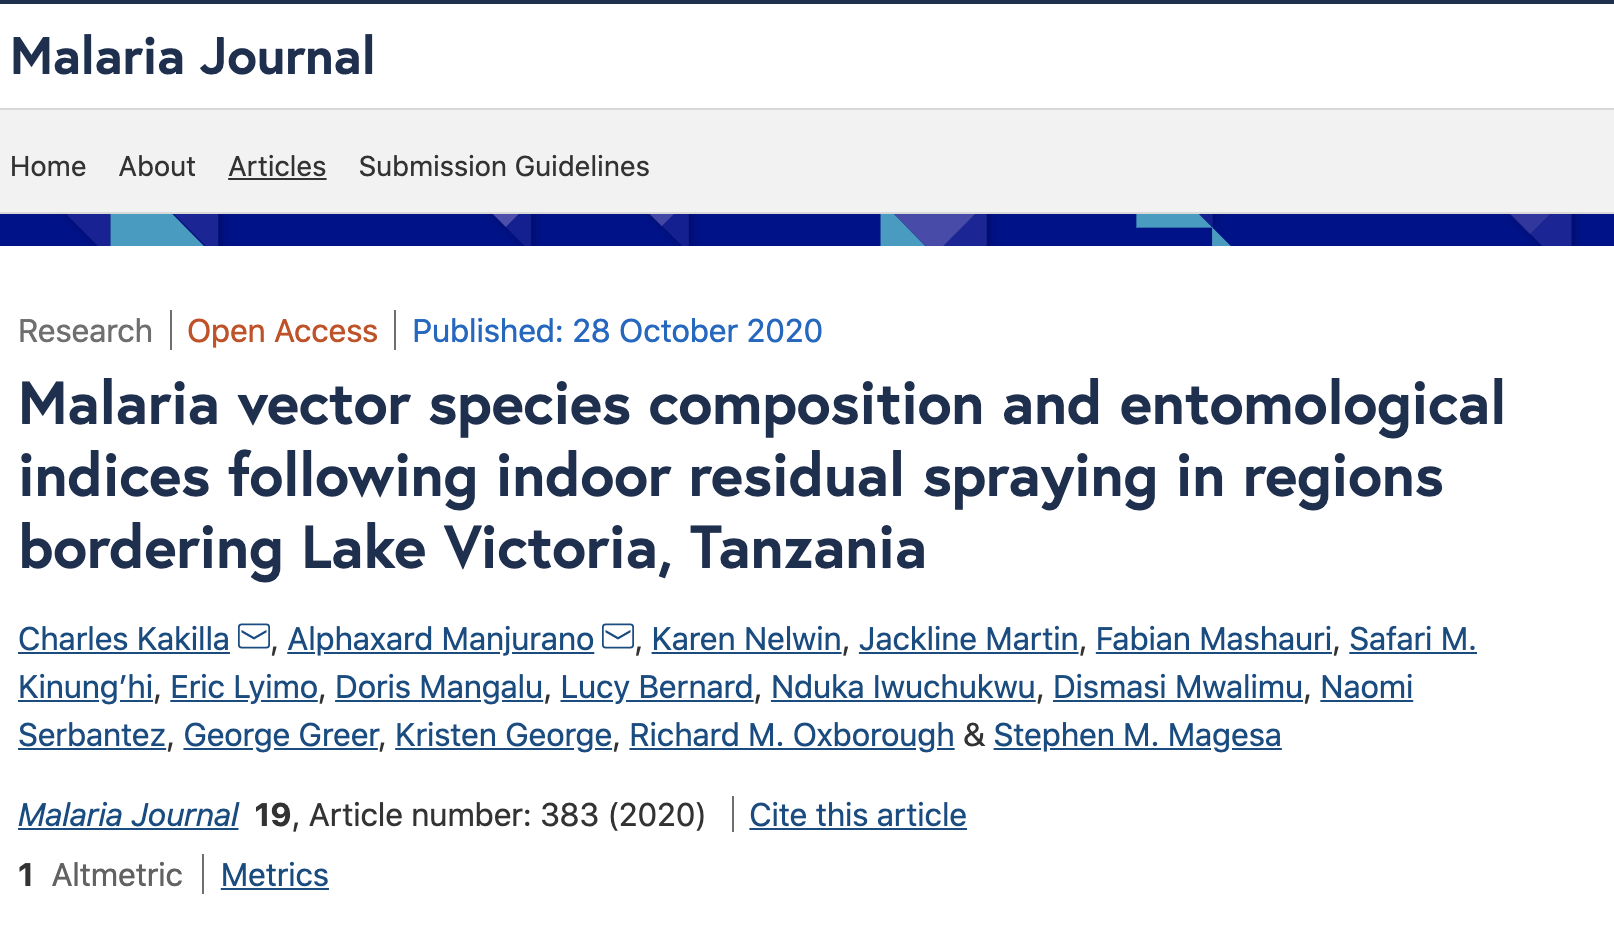 PMI VectorLink study contributes to the understanding of Tanzanian malaria vector transmission risk following IRS.